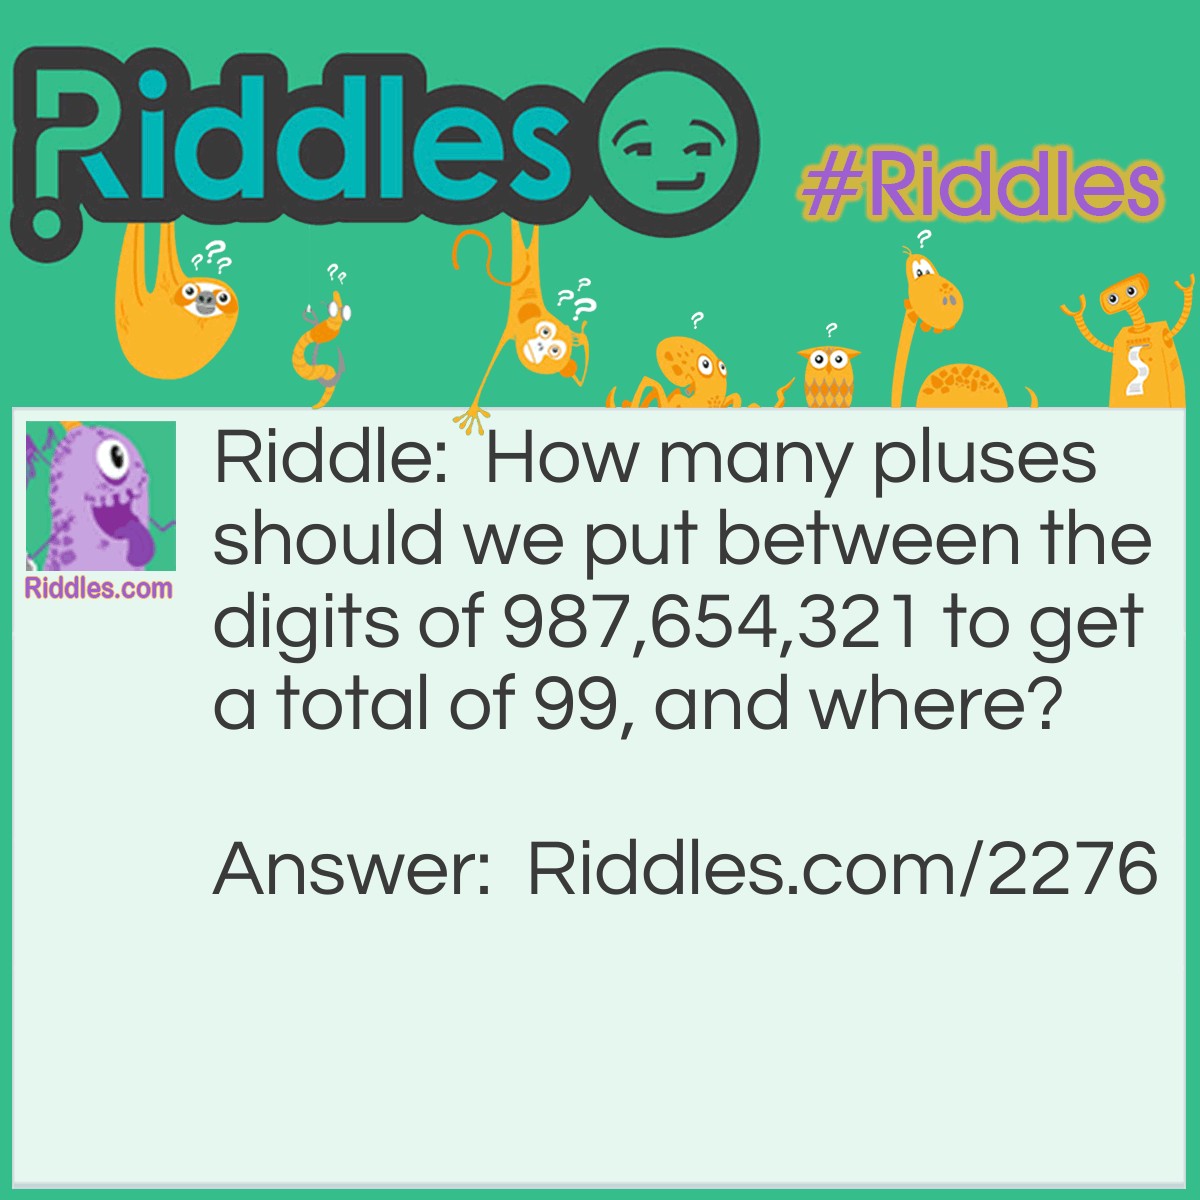 Riddle: How many pluses should we put between the digits of 987,654,321 to get a total of 99, and where? Answer: (6) 9 + 8 + 7 + 6 + 5 + 43 + 21= 99
(7) 9 + 8 + 7 + 65 + 4 + 3 + 2 + 1= 99
 